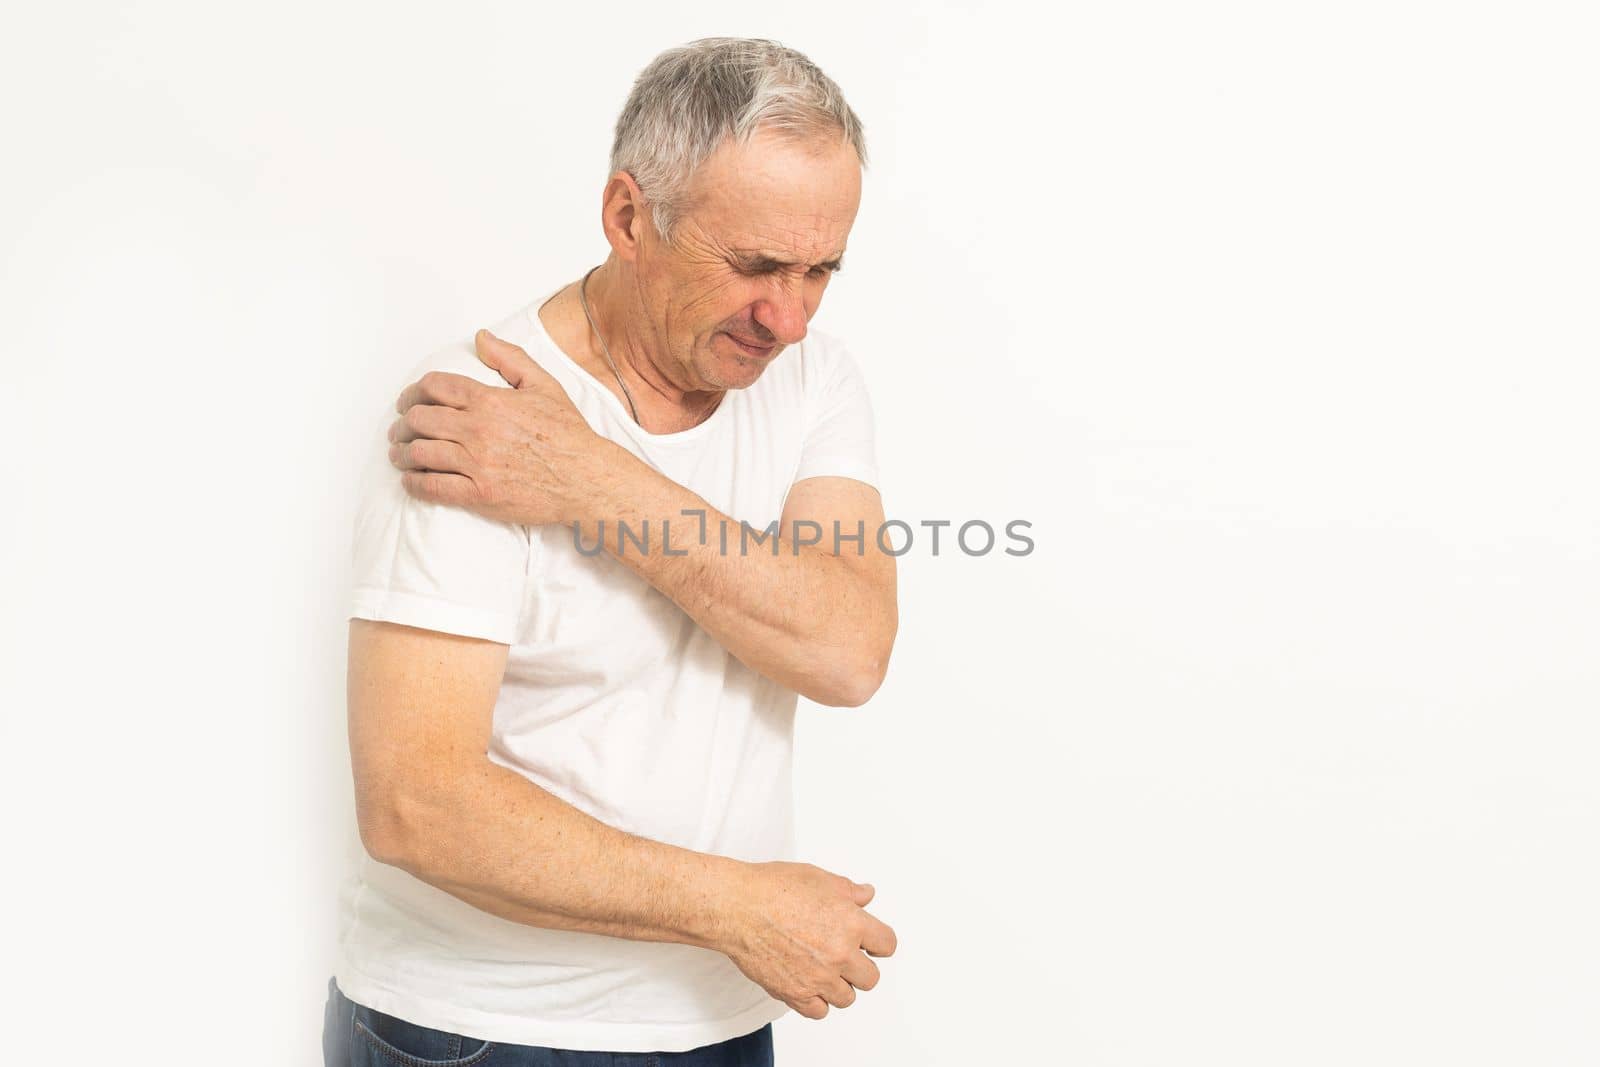 The elderly man suffering from the pain in this man's shoulder was extremely painful and held his shoulder.